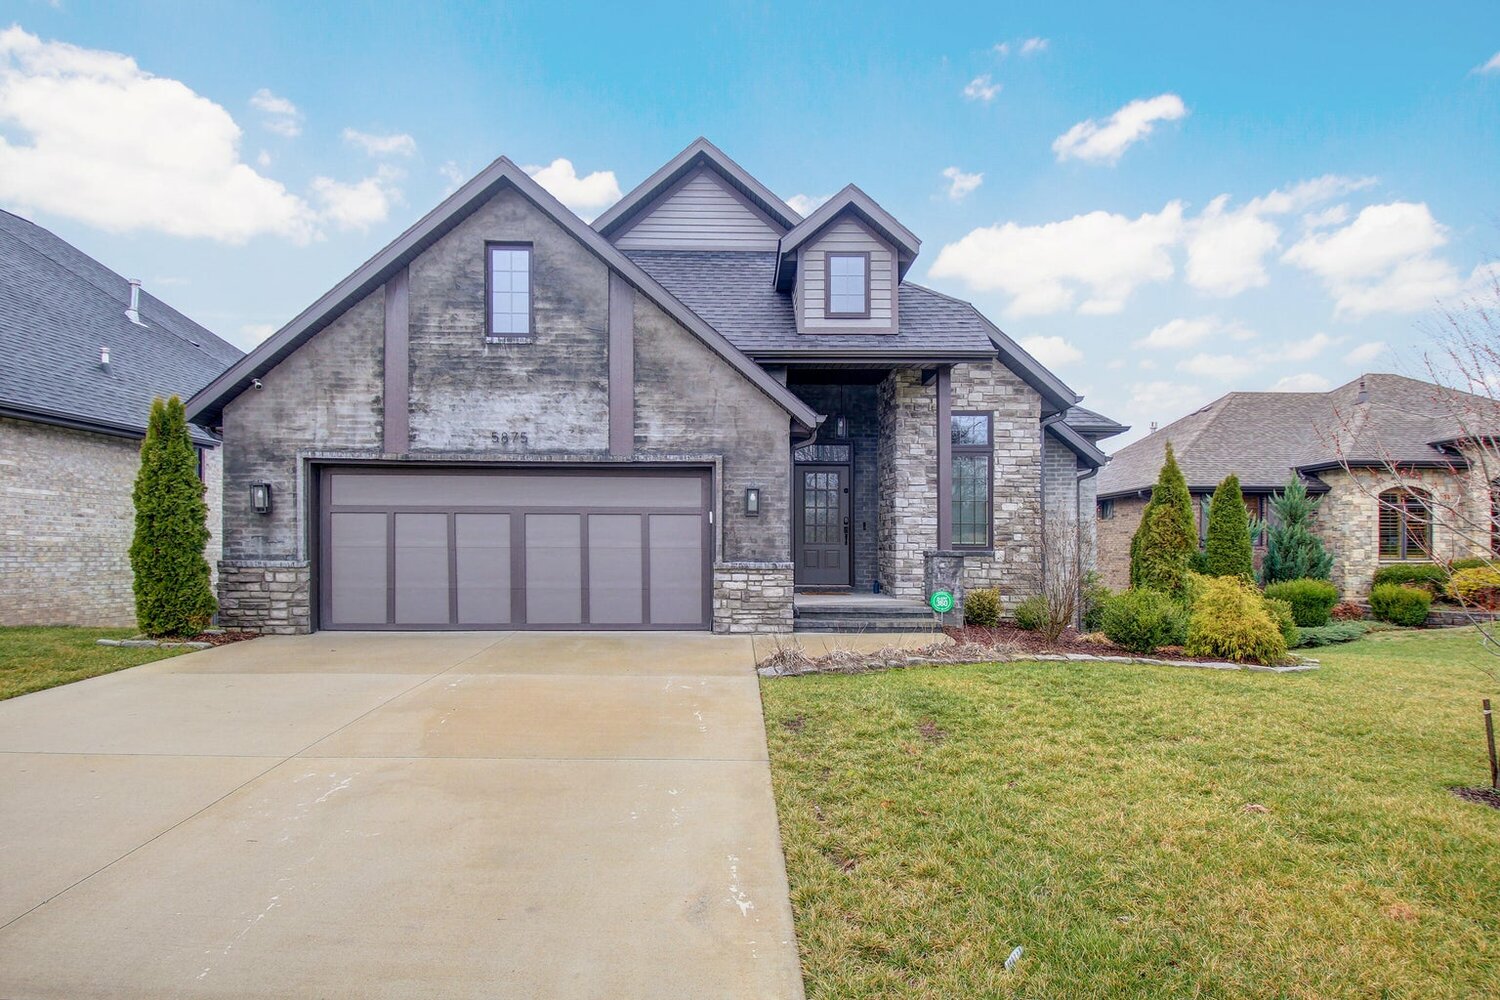 5875 S. Anthony Court
$664,900
Bedrooms: 5
Bathrooms: 3
Listing firm: Keller Williams Greater Springfield